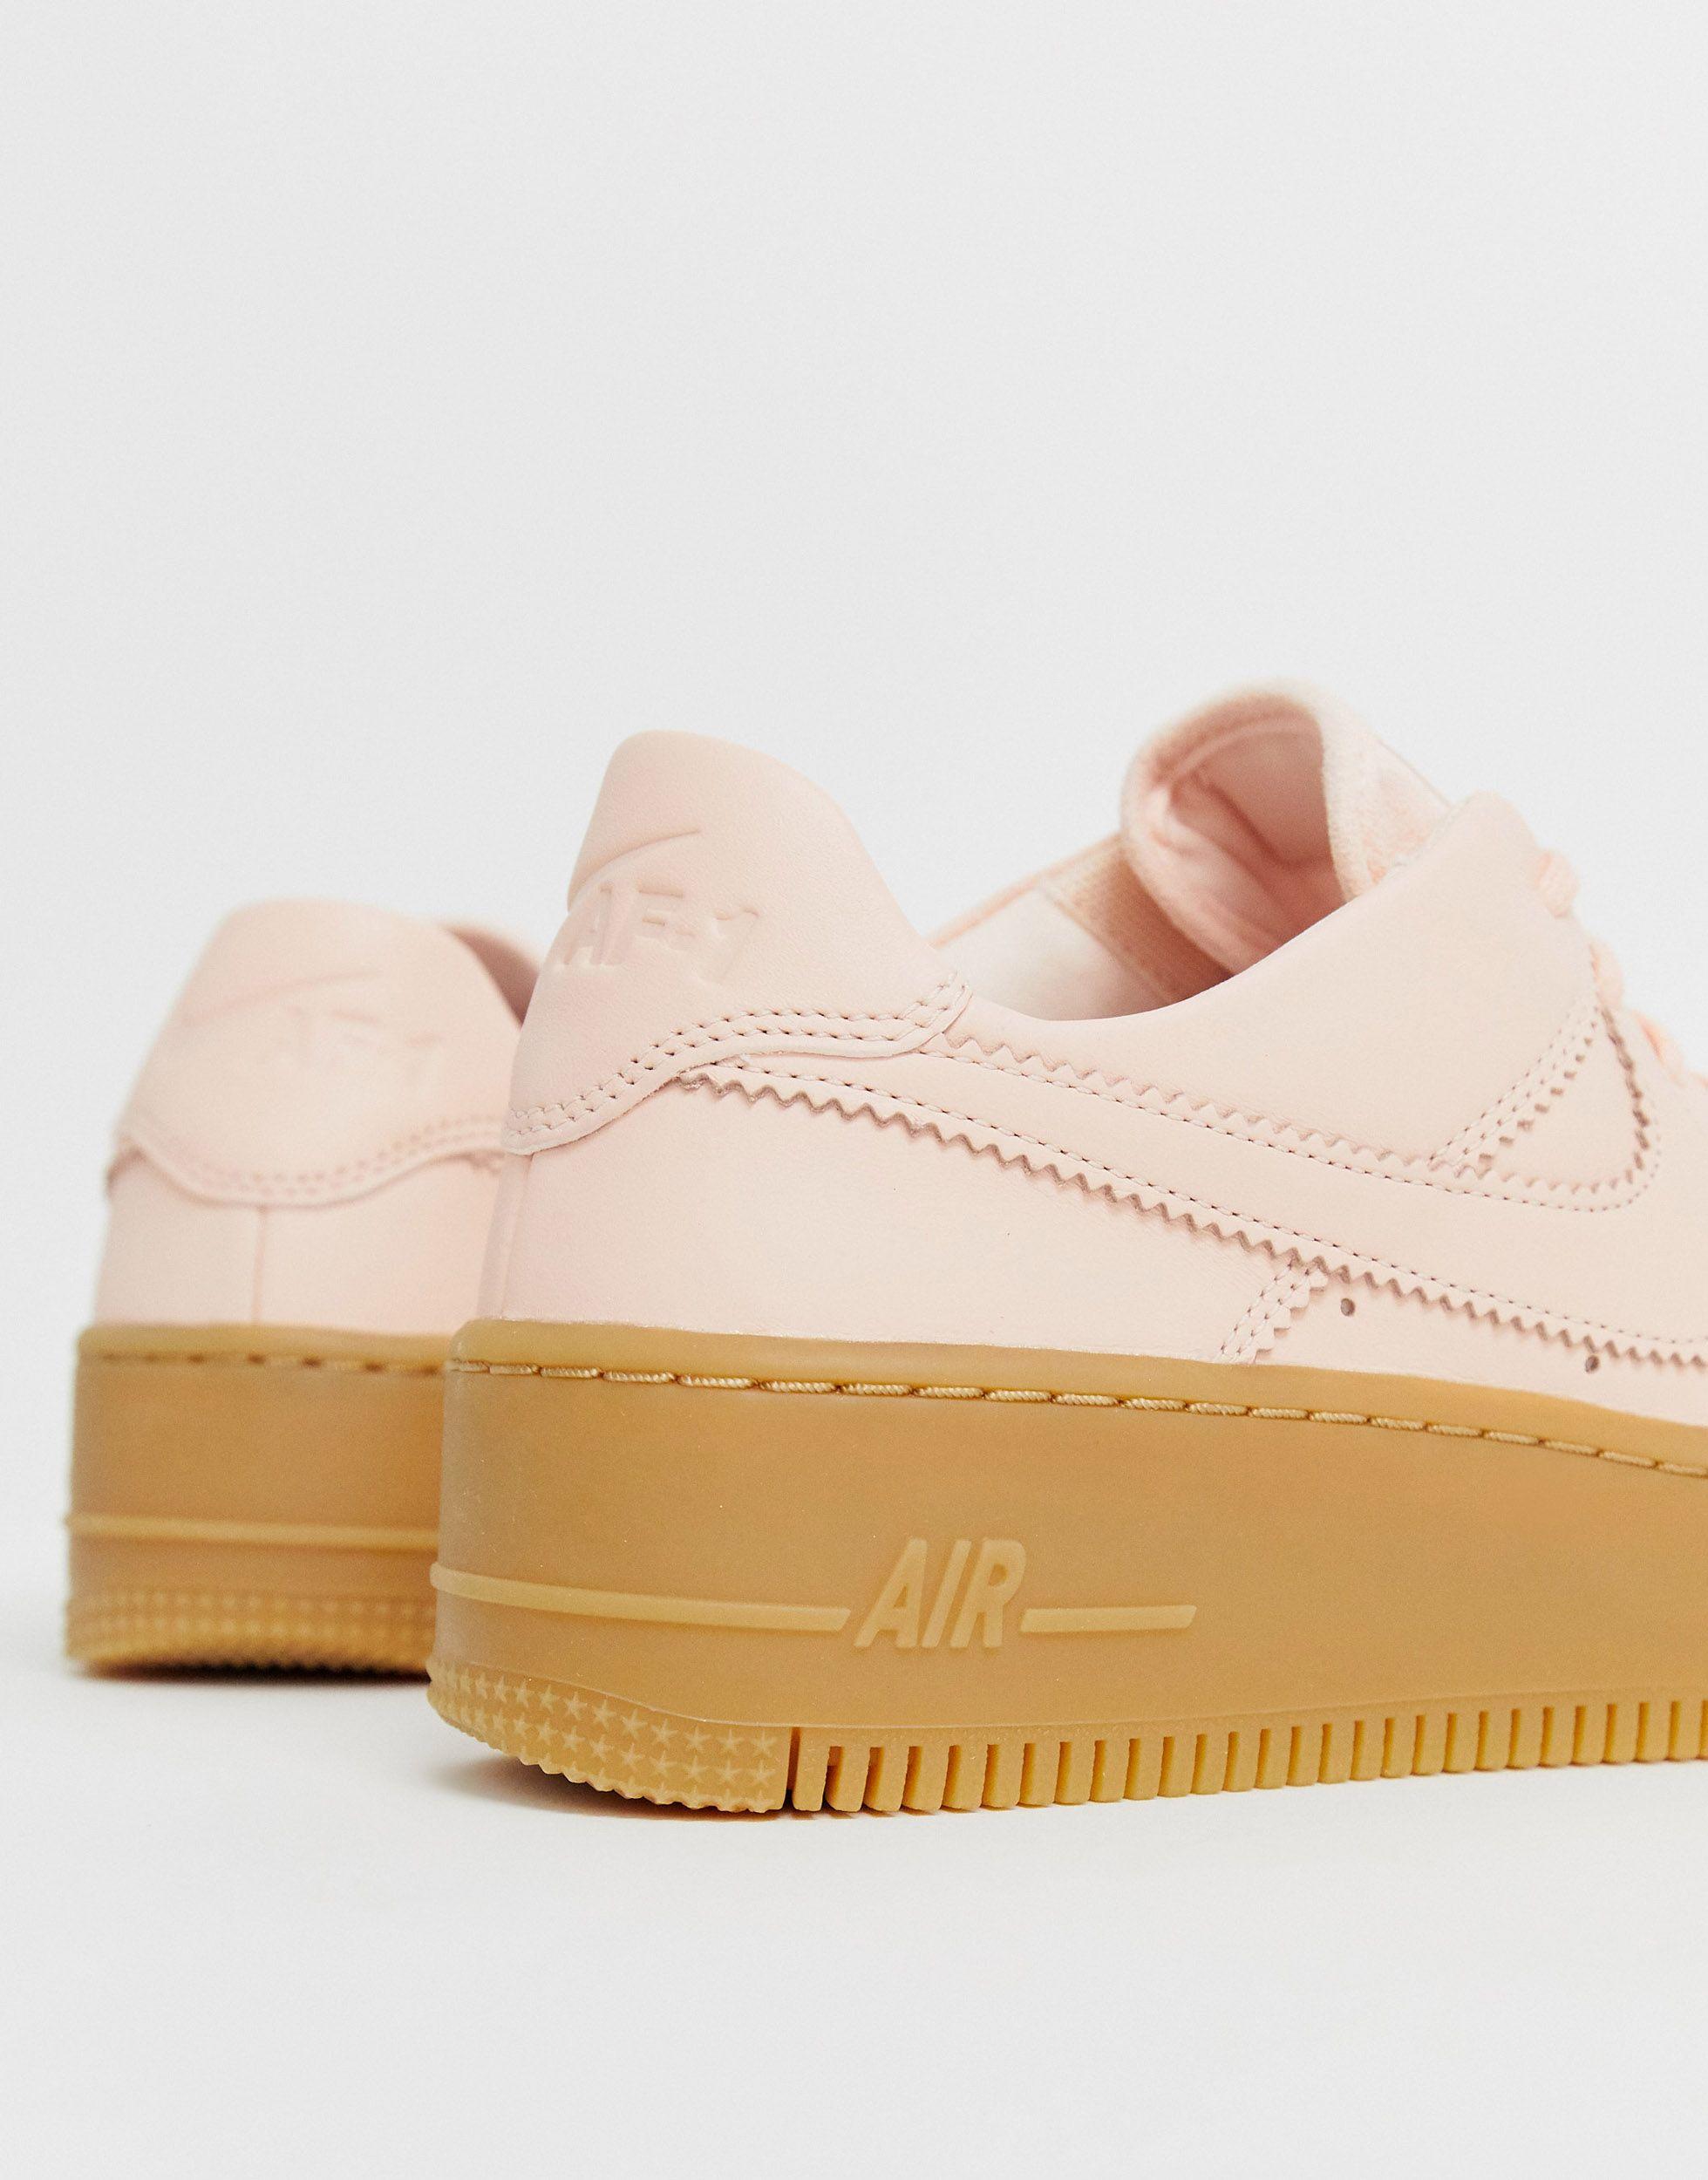 Nike Rubber Pale Gum Sole Air Force 1 Sage Low Trainers in Pink | Lyst